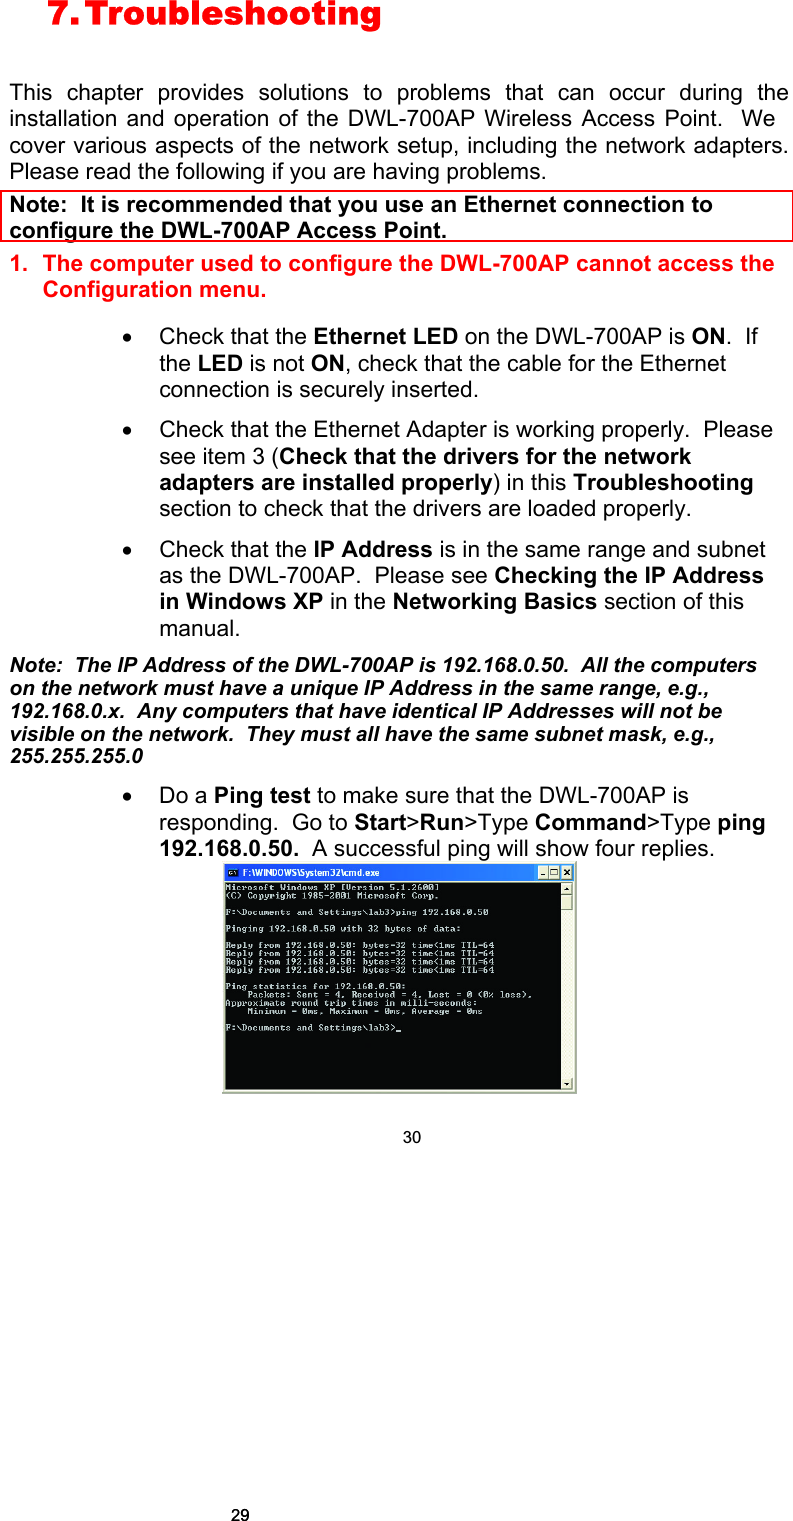 7. Troubleshooting   This chapter provides solutions to problems that can occur during the installation and operation of the DWL-700AP Wireless Access Point.  We cover various aspects of the network setup, including the network adapters.  Please read the following if you are having problems.  Note:  It is recommended that you use an Ethernet connection to configure the DWL-700AP Access Point. 1. The computer used to configure the DWL-700AP cannot access the Configuration menu.  • Check that the Ethernet LED on the DWL-700AP is ON.  If the LED is not ON, check that the cable for the Ethernet connection is securely inserted. • Check that the Ethernet Adapter is working properly.  Please see item 3 (Check that the drivers for the network adapters are installed properly) in this Troubleshooting section to check that the drivers are loaded properly. • Check that the IP Address is in the same range and subnet as the DWL-700AP.  Please see Checking the IP Address in Windows XP in the Networking Basics section of this manual. Note:  The IP Address of the DWL-700AP is 192.168.0.50.  All the computers on the network must have a unique IP Address in the same range, e.g., 192.168.0.x.  Any computers that have identical IP Addresses will not be visible on the network.  They must all have the same subnet mask, e.g., 255.255.255.0 • Do a Ping test to make sure that the DWL-700AP is responding.  Go to Start&gt;Run&gt;Type Command&gt;Type ping 192.168.0.50.  A successful ping will show four replies.  302929